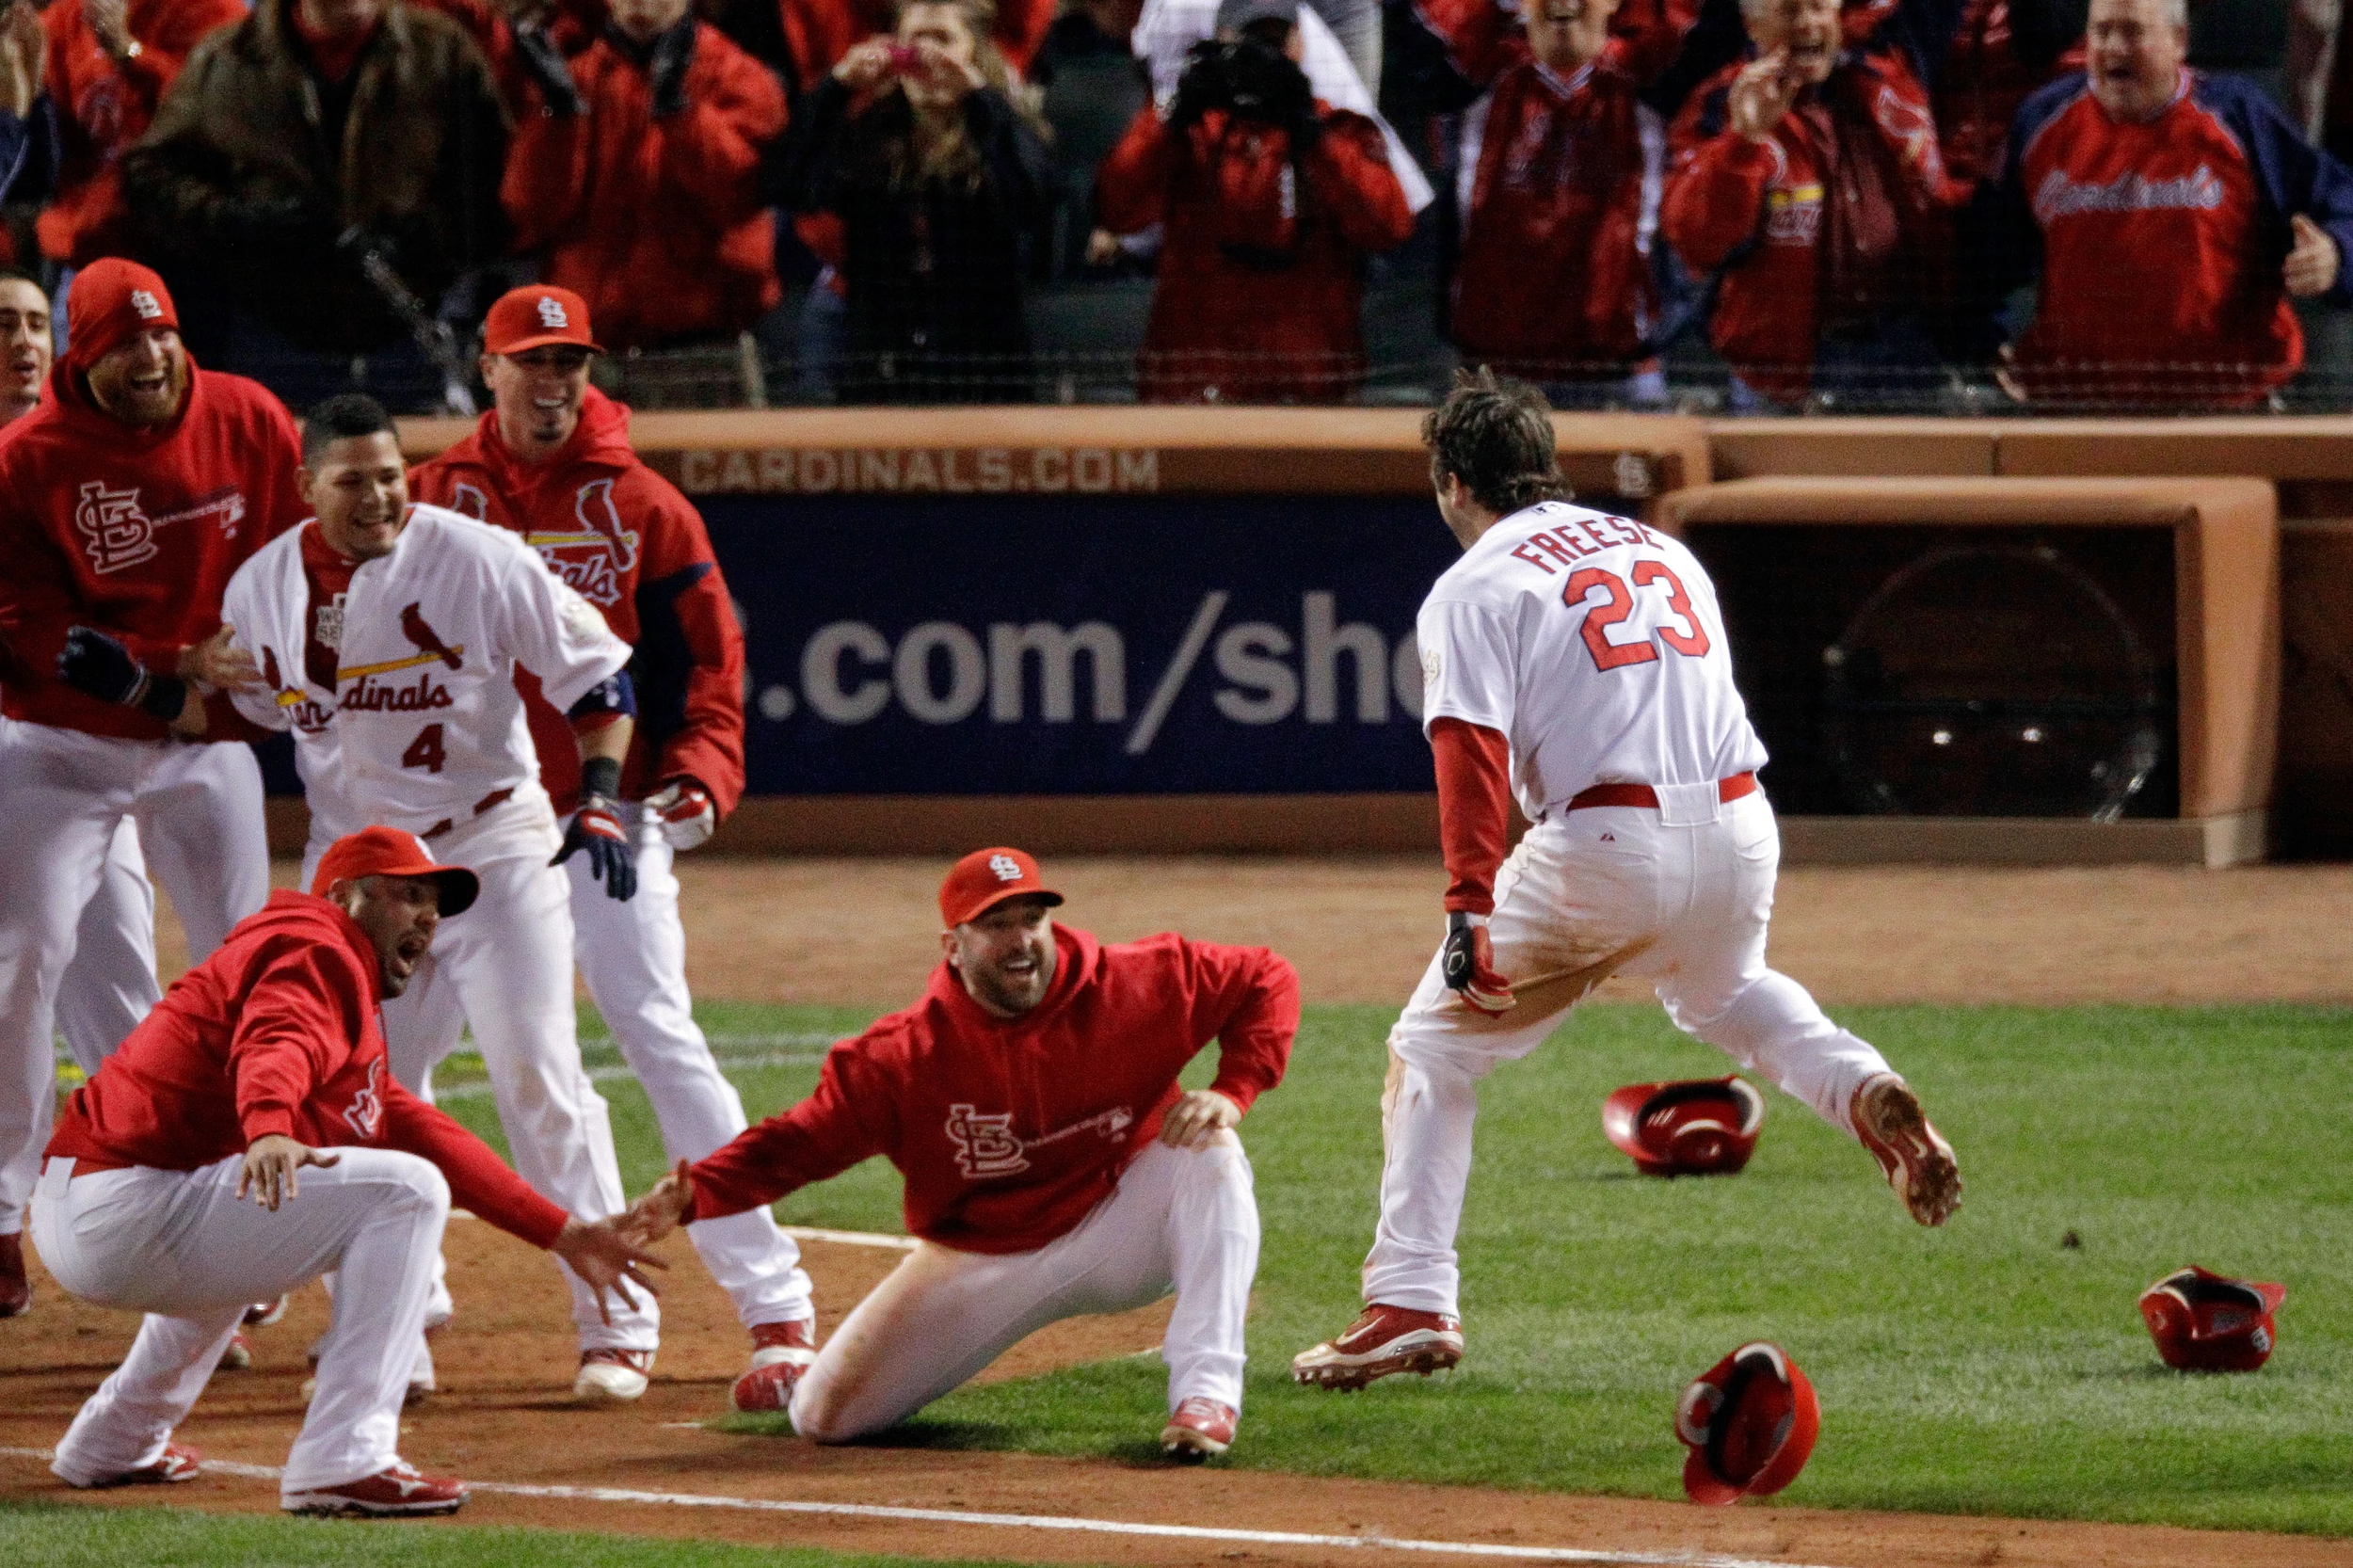 Cardinals Win In Walk-Off Fashion 10-9 To Force Game 7 Of World Series 2011 World Series Game 6 ...